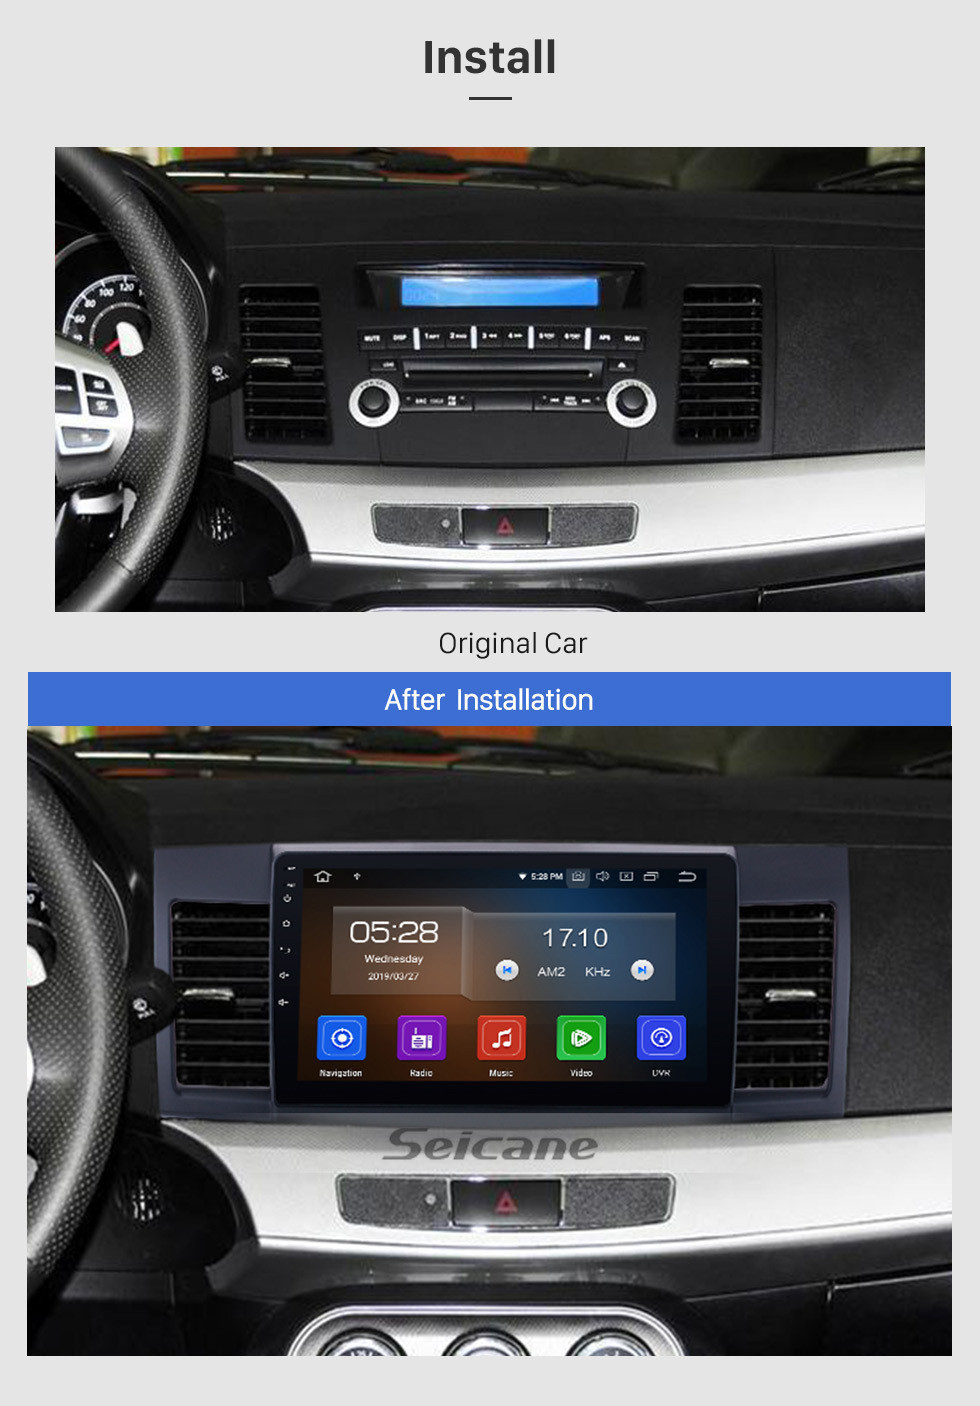 Seicane 2007-2015 Mitsubishi Lancer 10.1 inch Android 11.0 Radio 1024*600 Touchscreen DVD GPS navigation system Mirror link Bluetooth OBD2 DVR Rearview Camera TV 1080P 4G WIFI Steering Wheel Control 